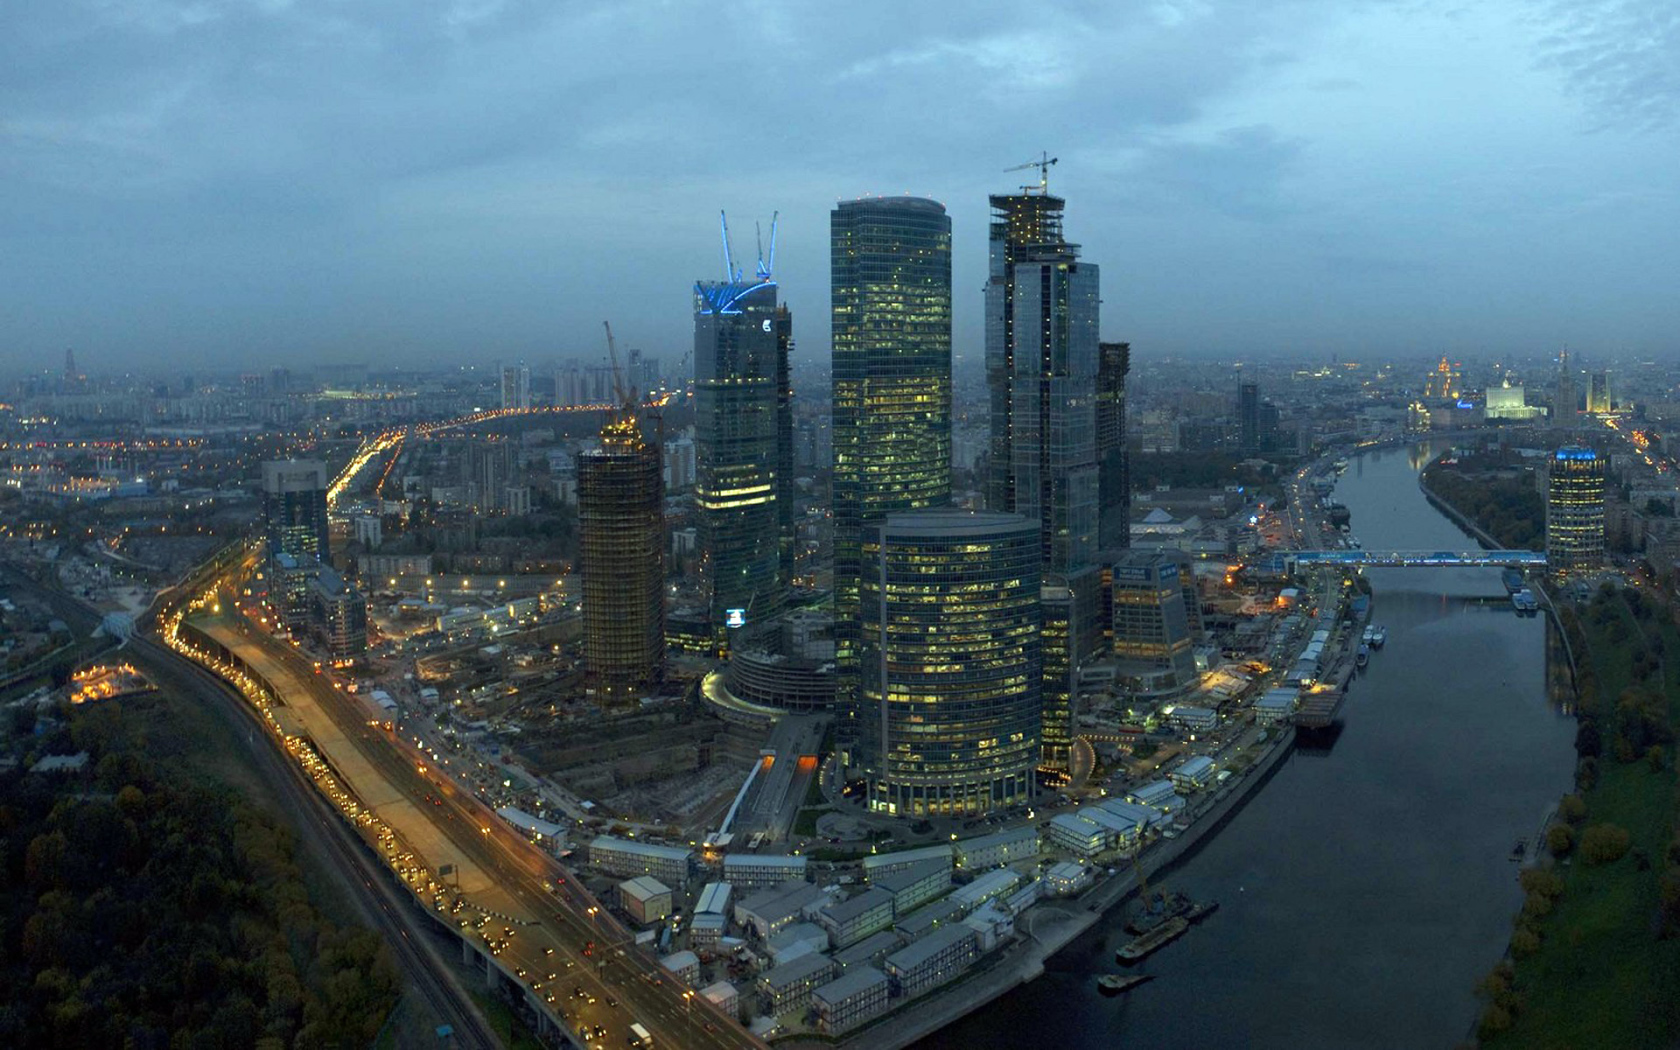 The Moscow Skyscrapers are under construction